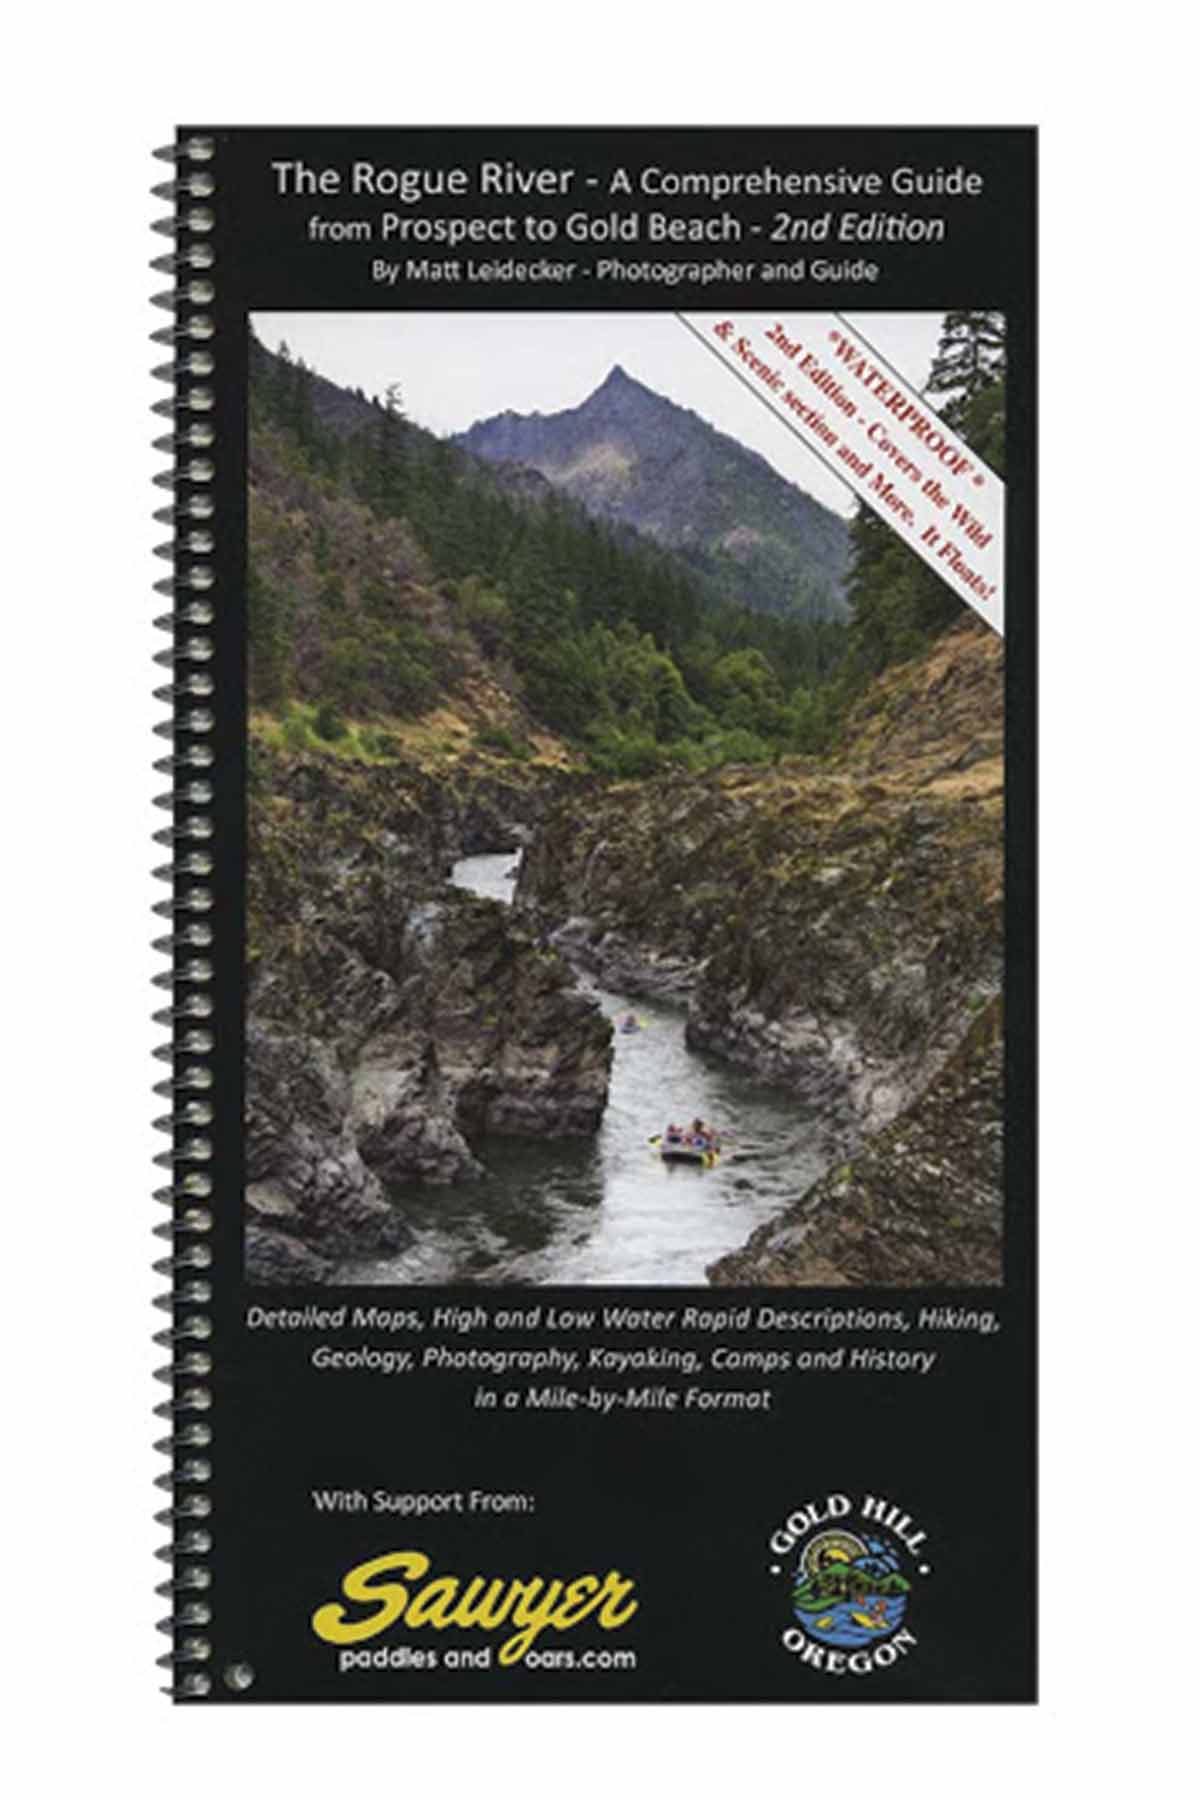 Rogue River Guide Book